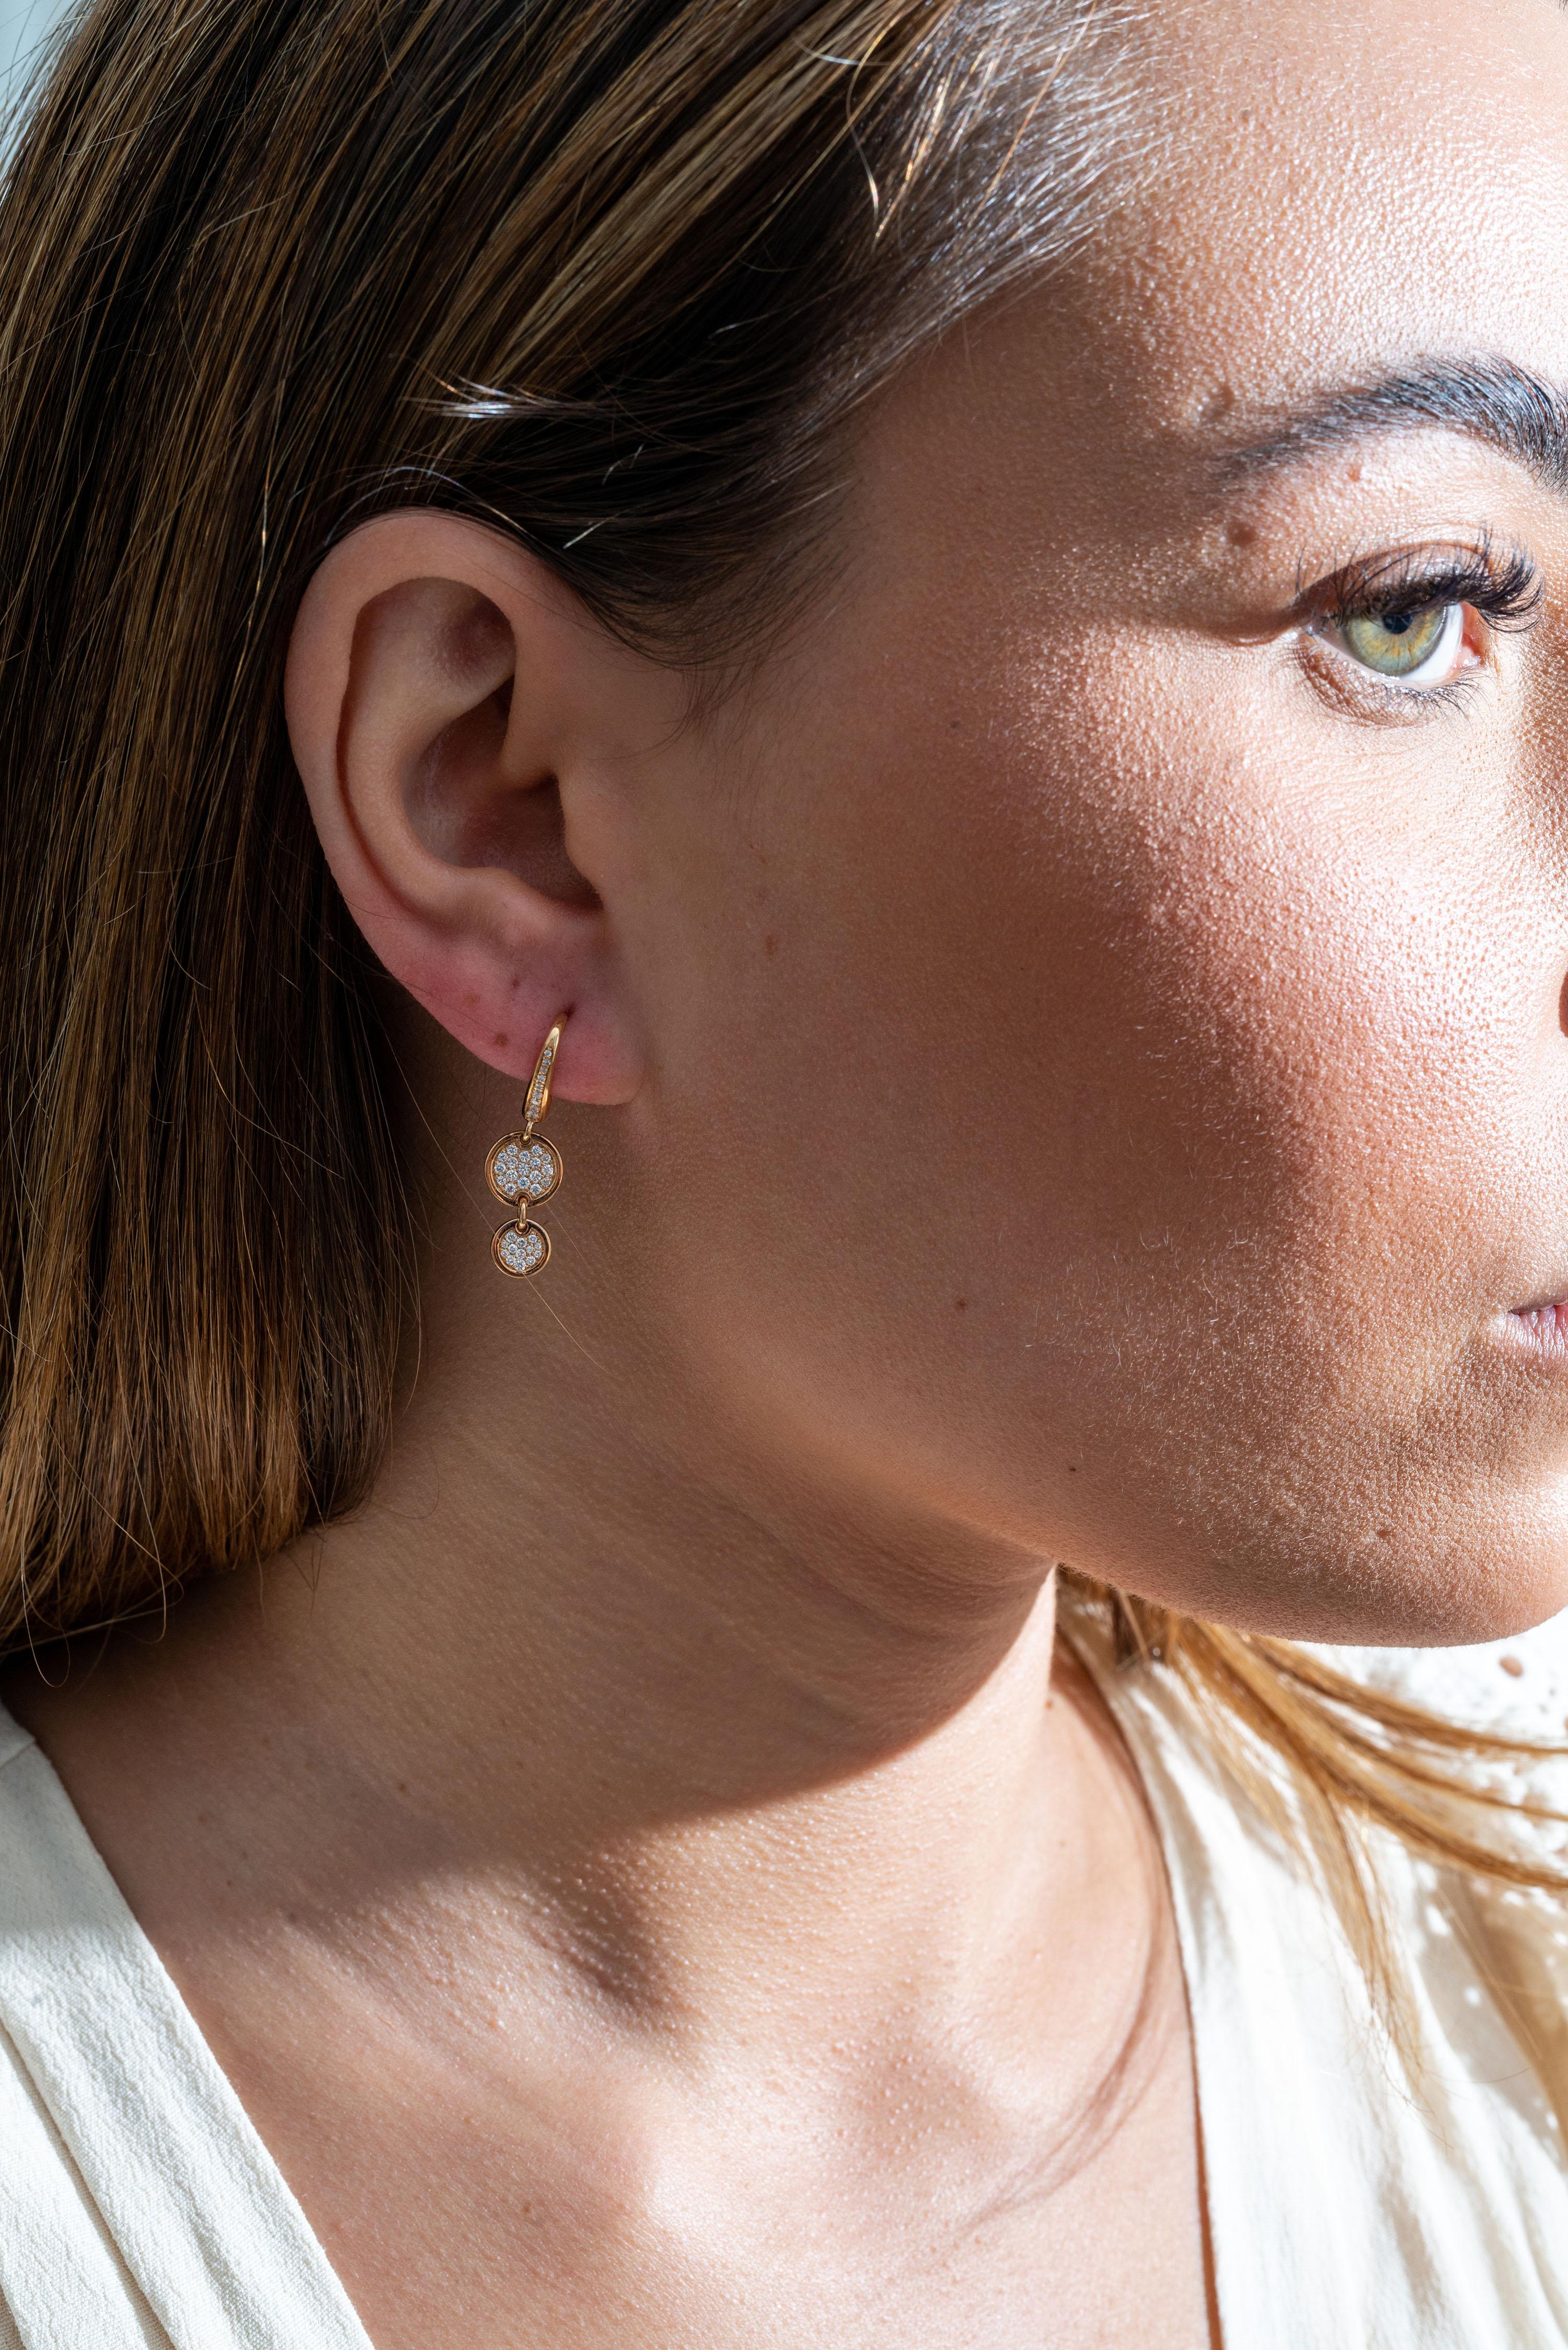 18K rose gold earrings are from Jackpot Collection. These stylish earrings are made of 2 circles each decorated by round colourless diamonds in total of 0.37 Carat. Total metal weight is 4.28 gr. The earrings are 3 cm long. Great for any occasion!